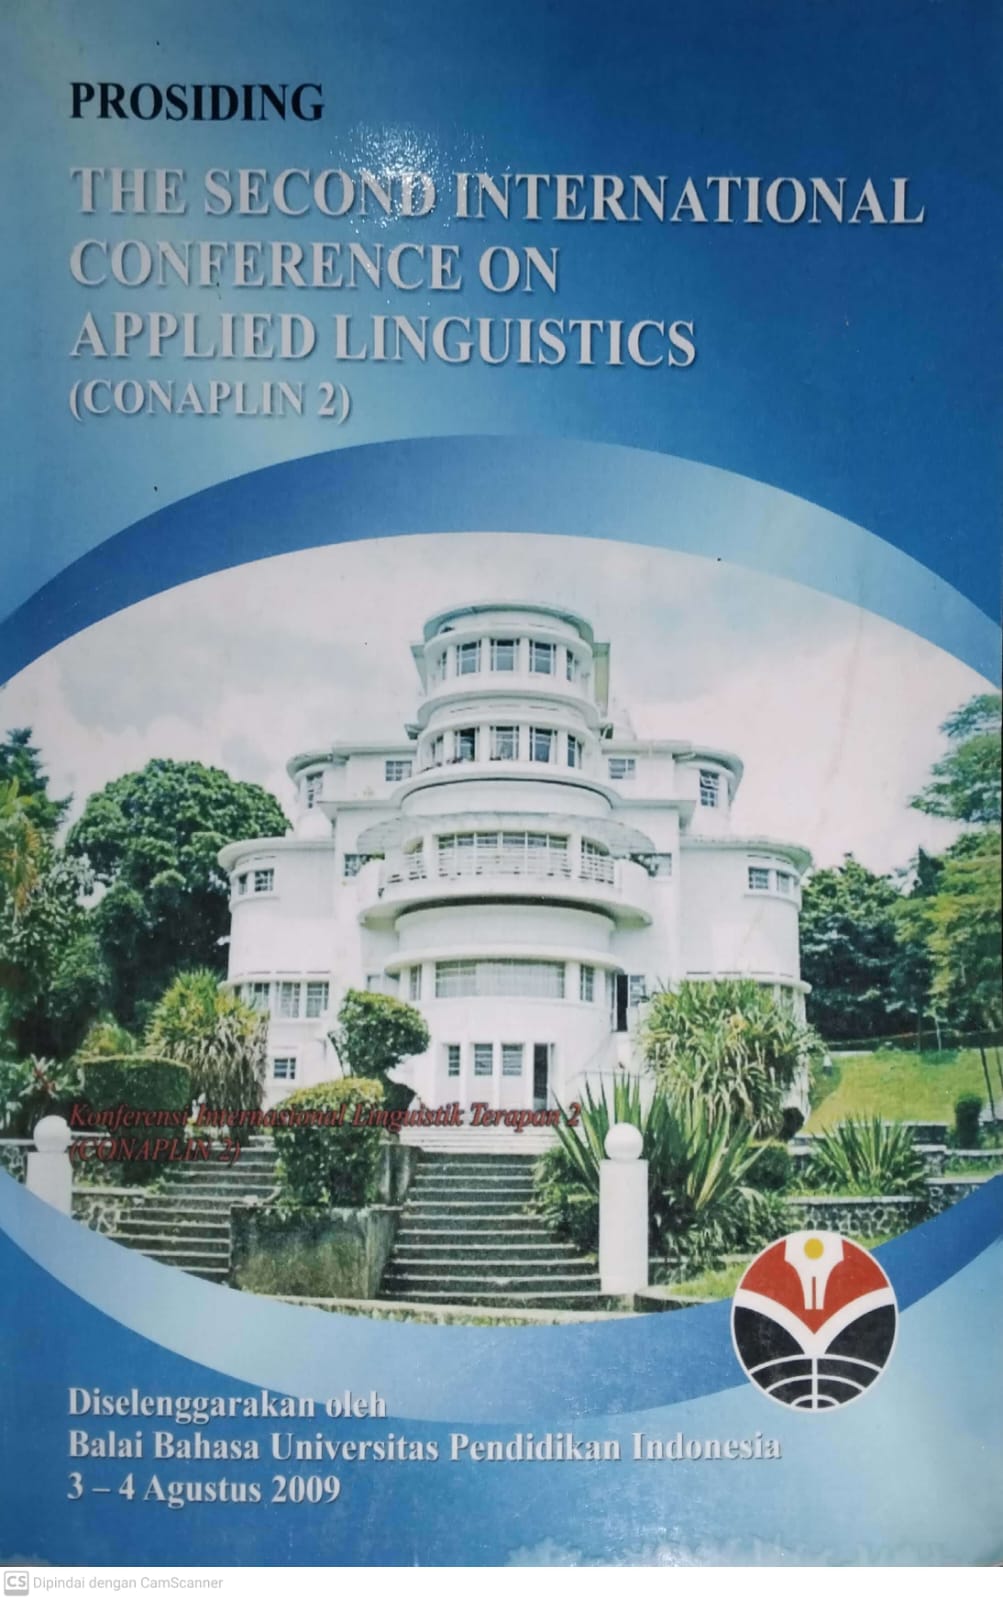 THE SECOND INTERNATIONAL CONFERENCE ON APPLIED LINGUISTICS (CONAPLIN 2)